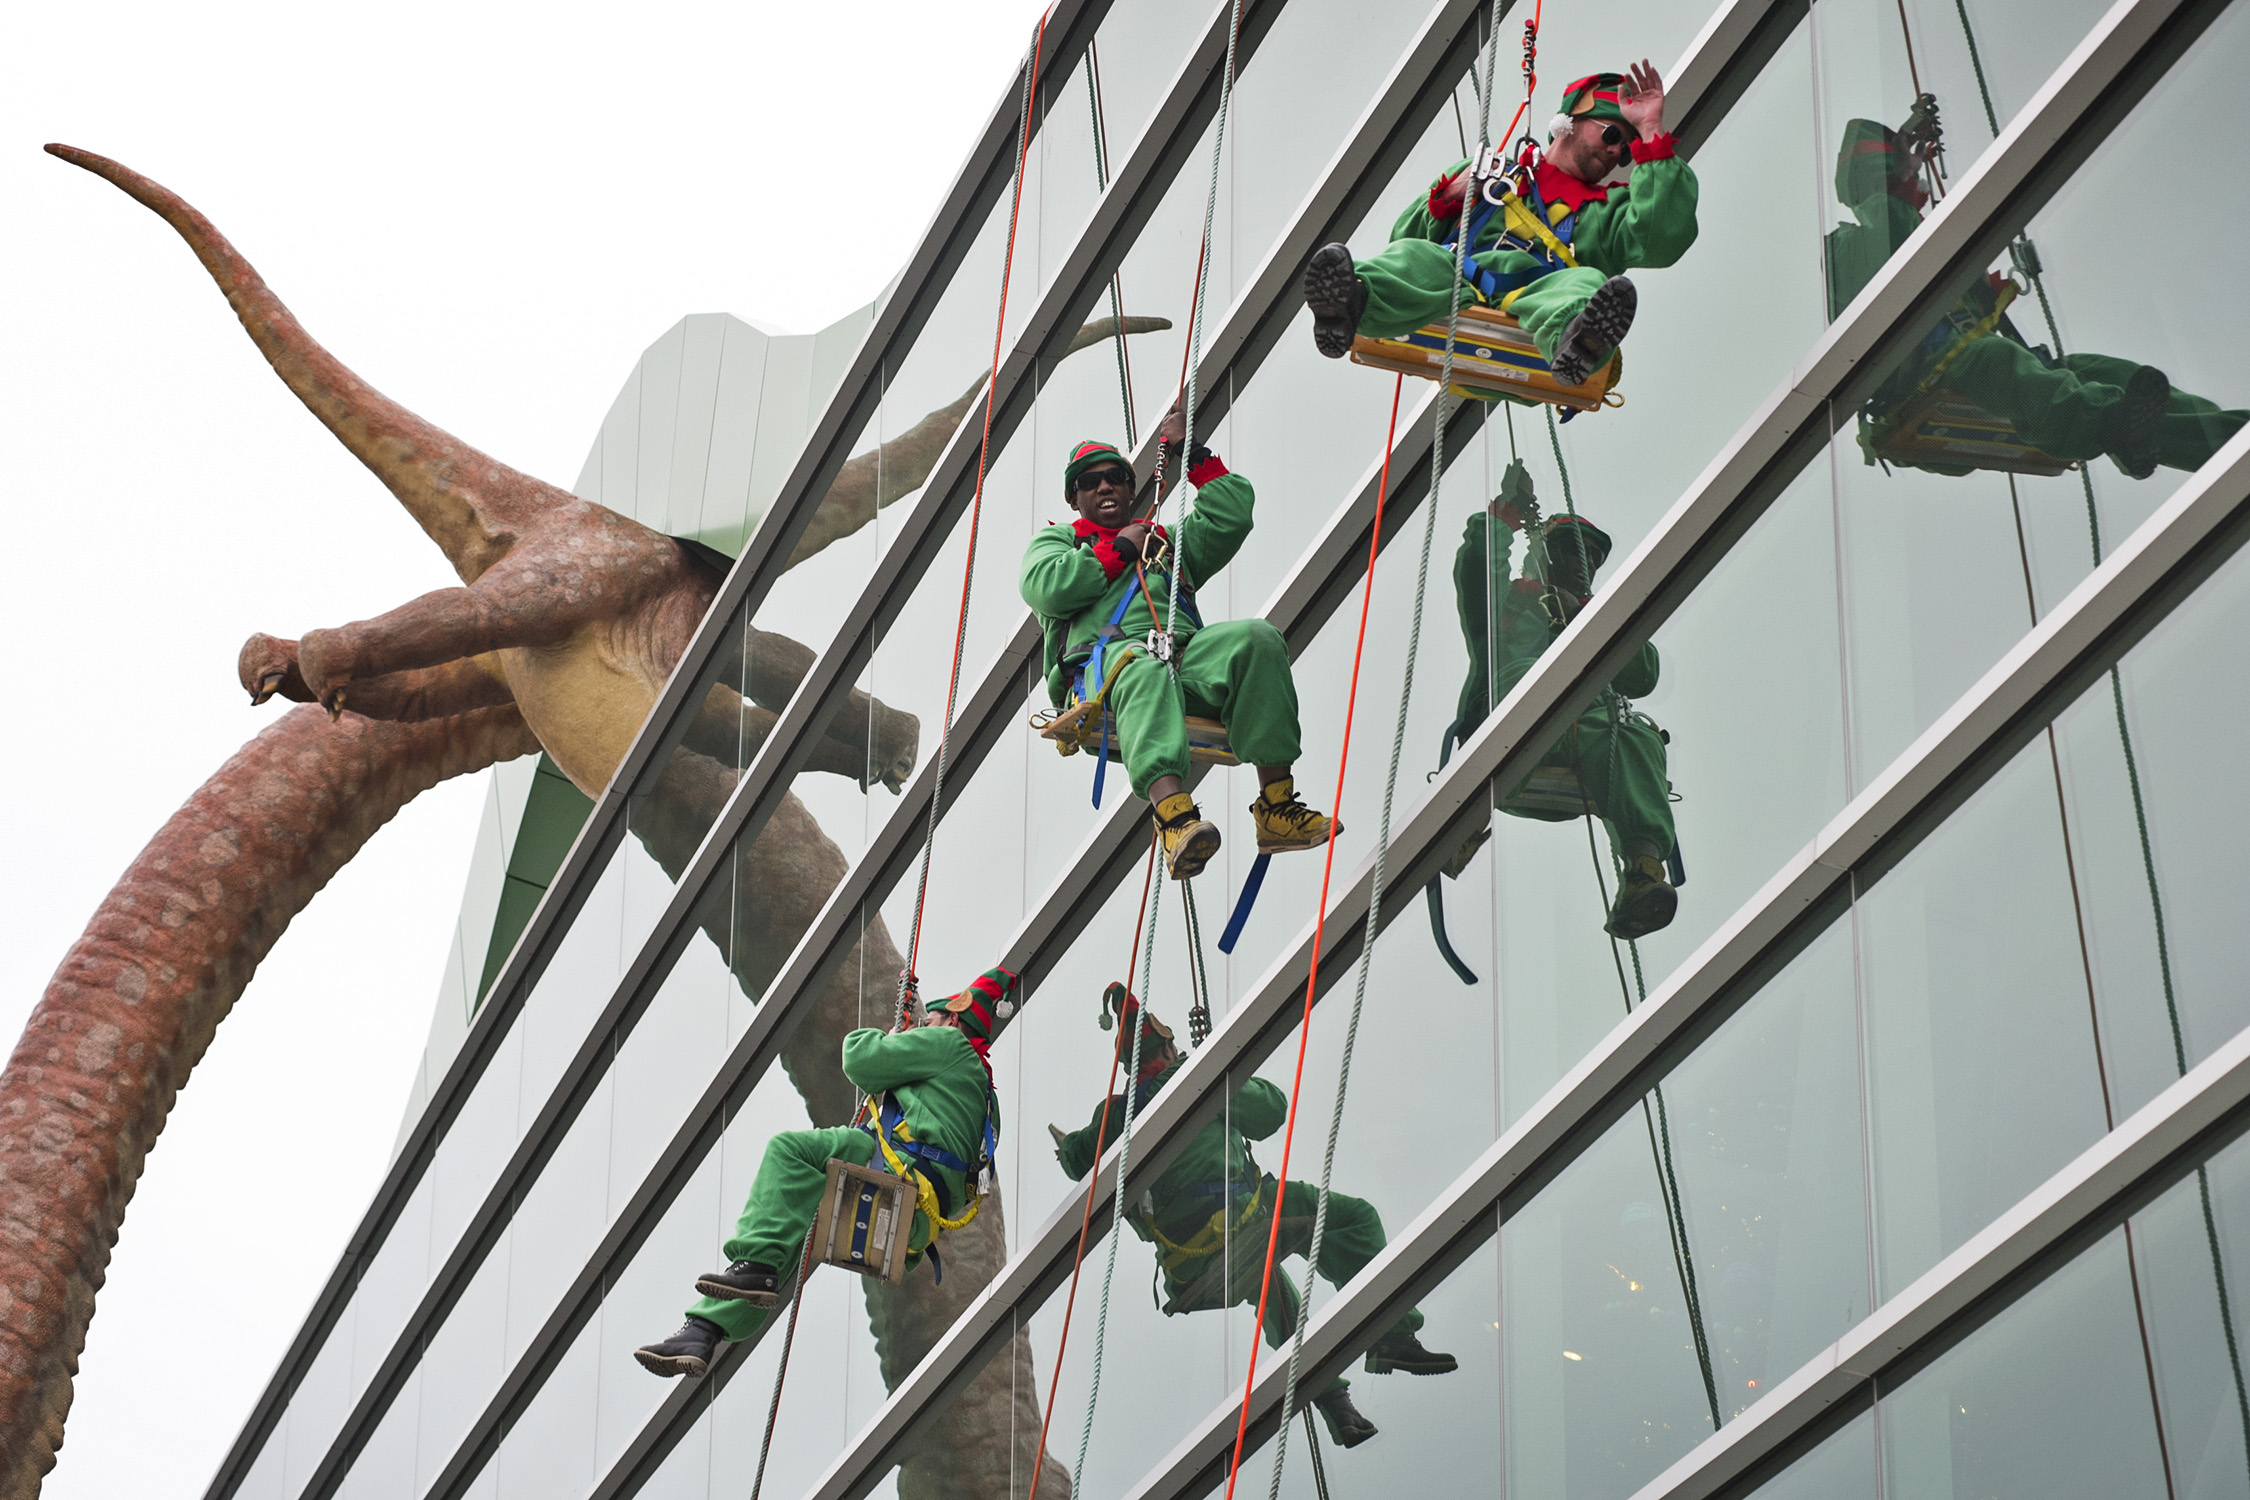 Elves repel from the rooftop of the world's largest children's museum